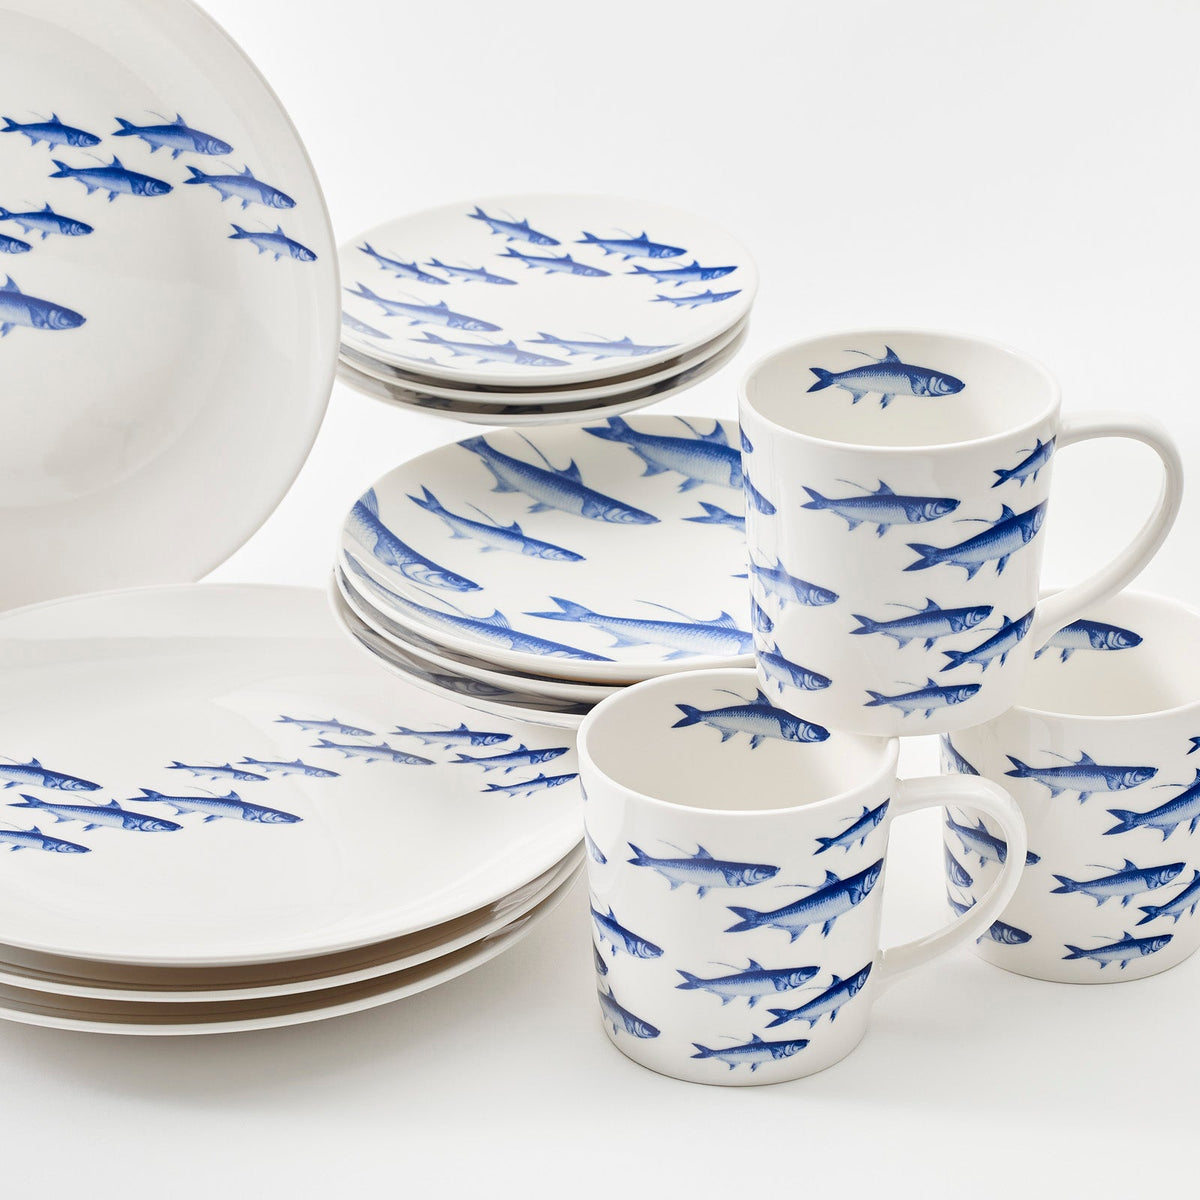 A set of Caskata porcelain dinnerware with sharks on it, perfect for your School of Fish Table for 4.